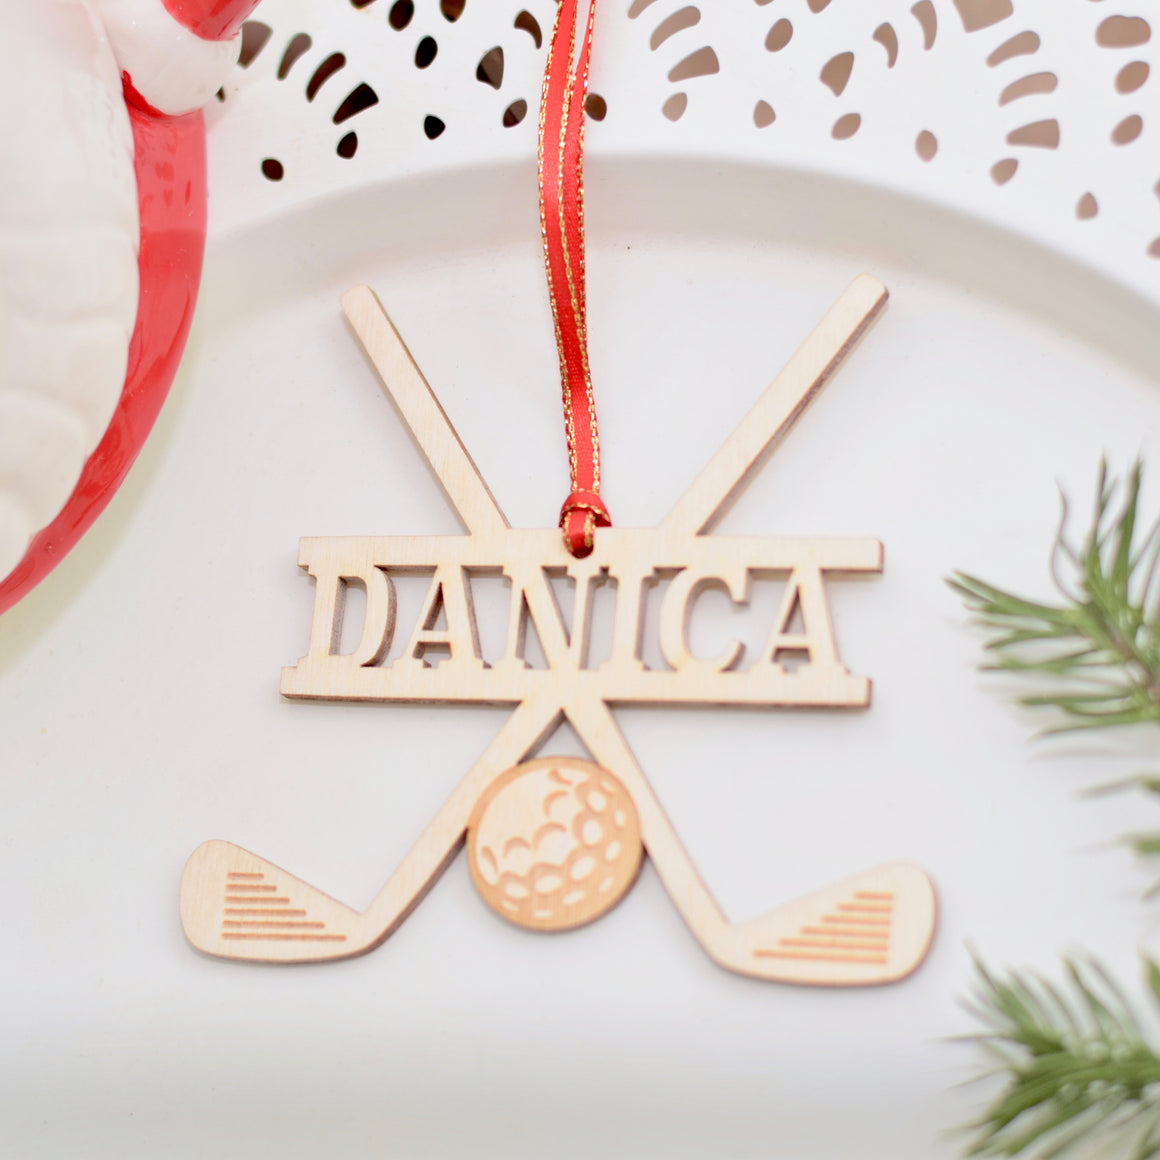 Golf Ornament on plate, Golf gifts for dad